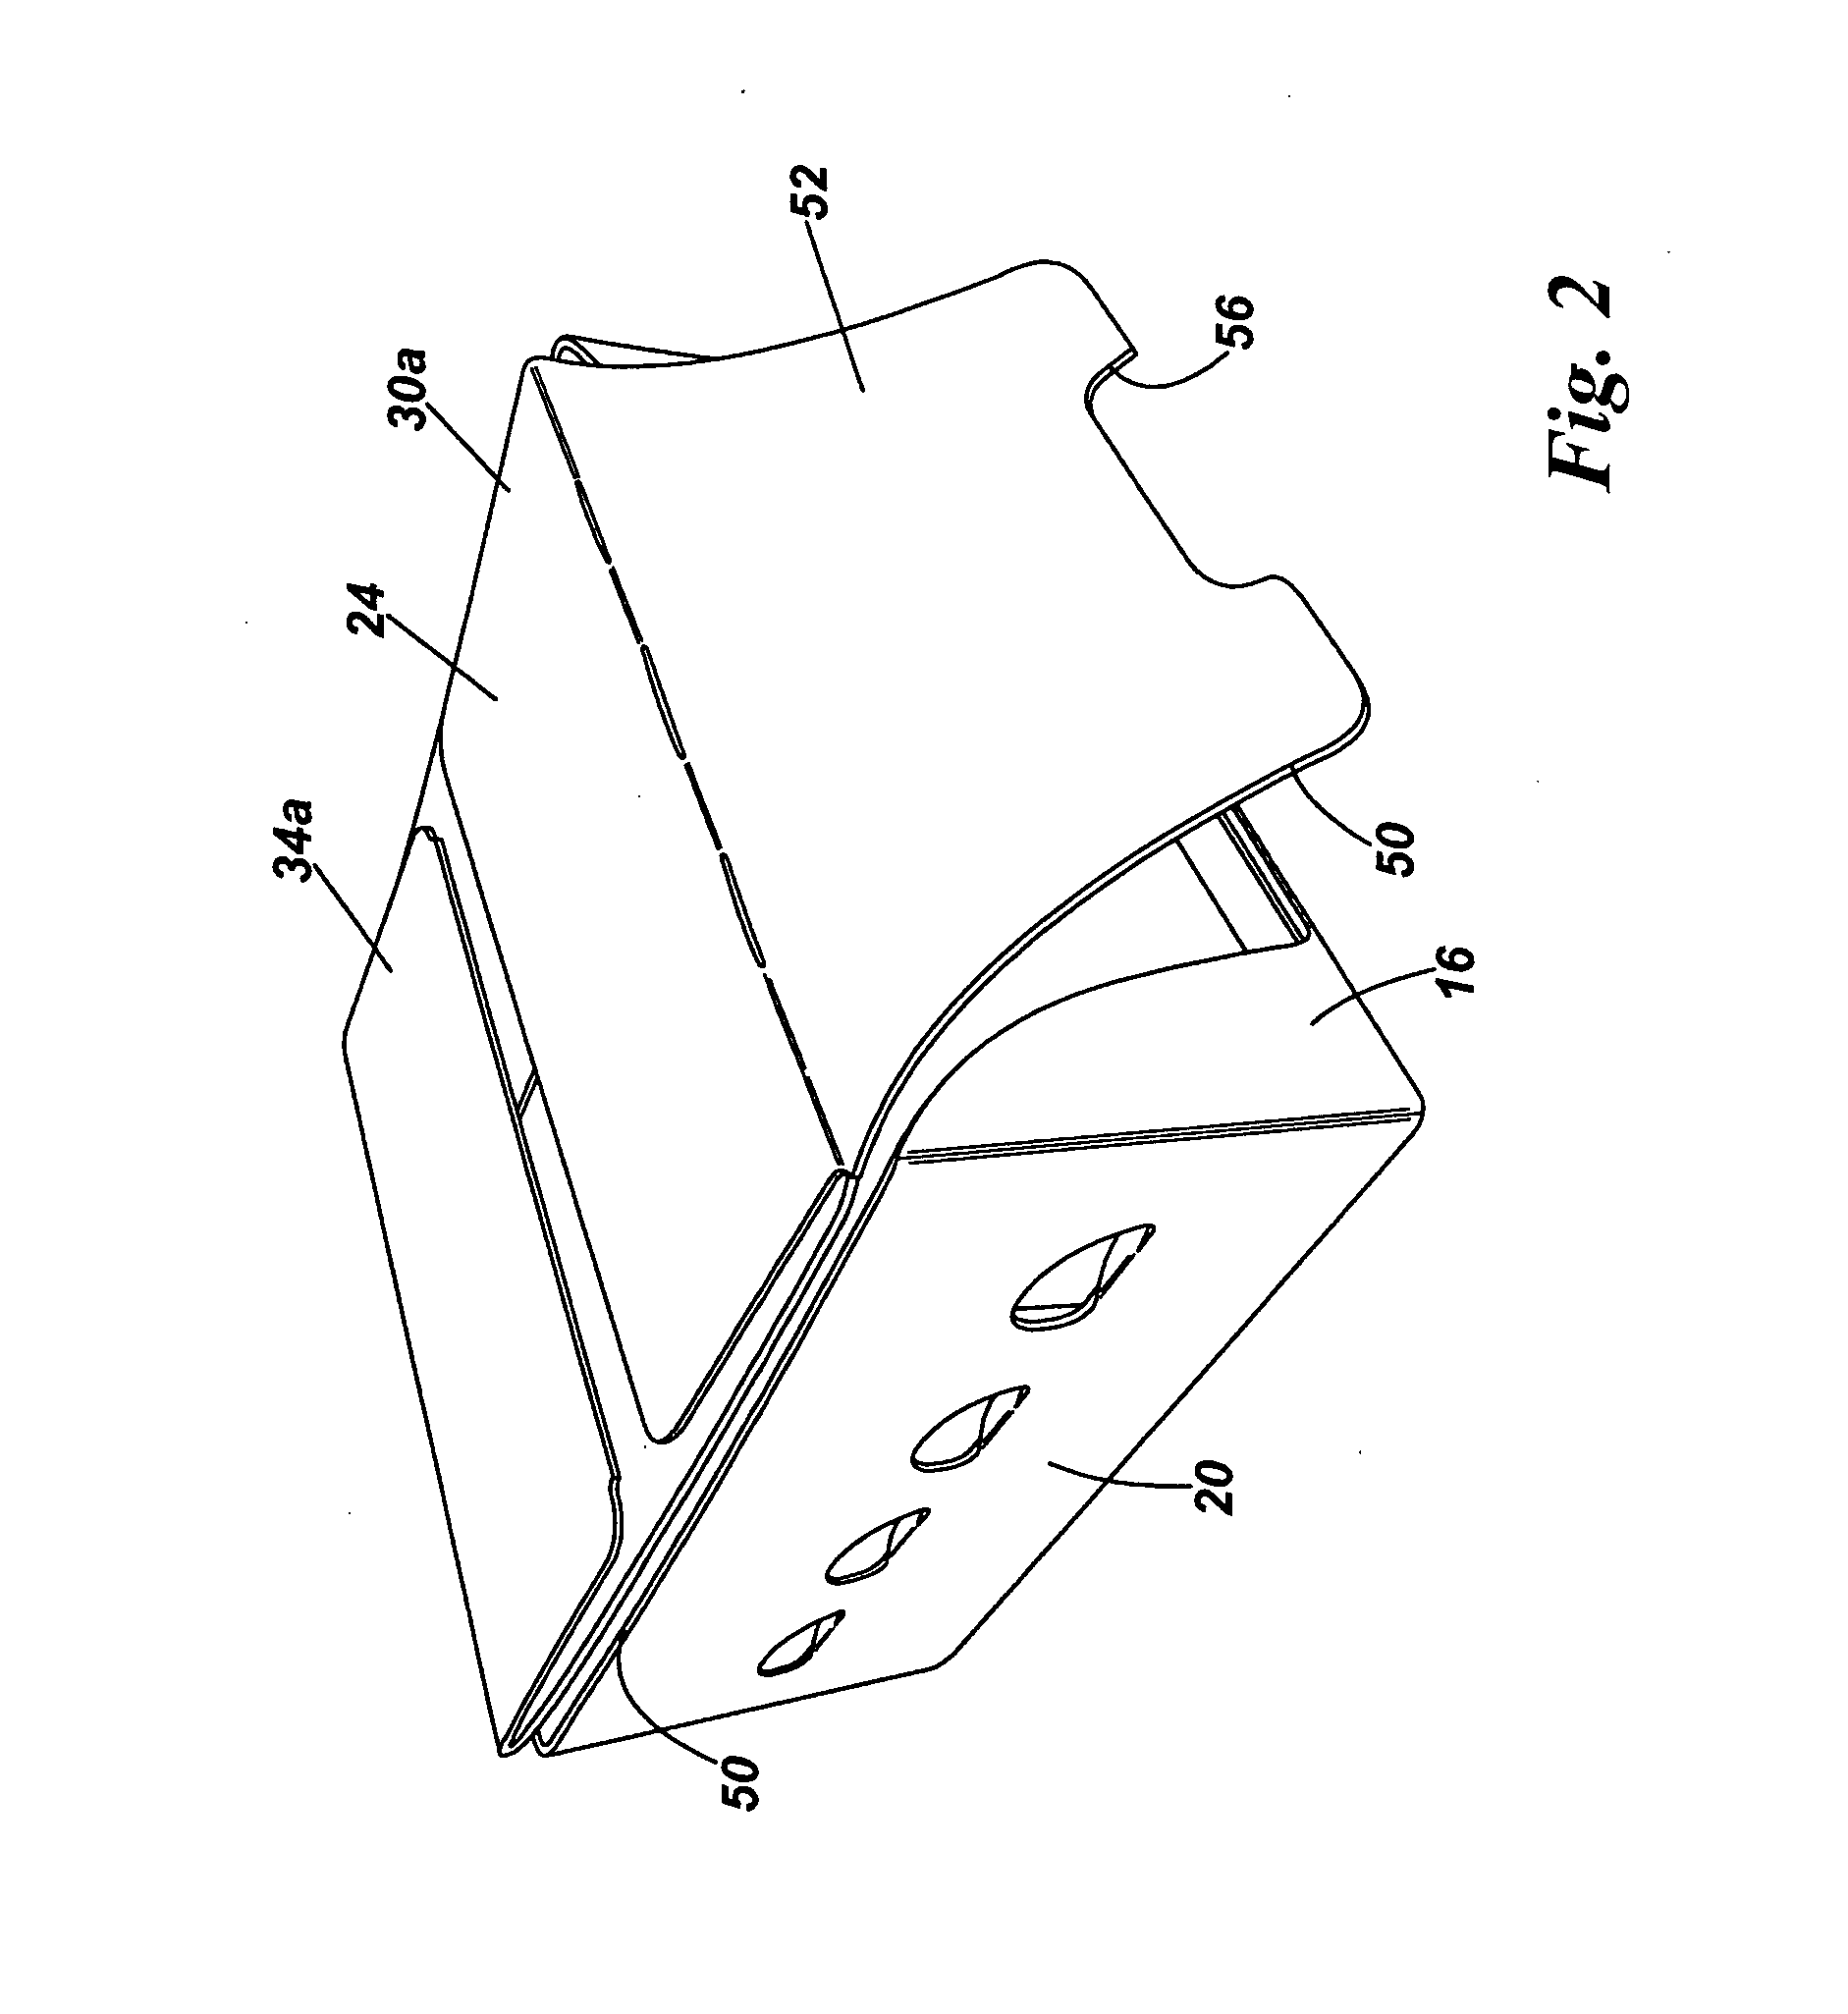 Packaging container, blank and method of forming a packaging container